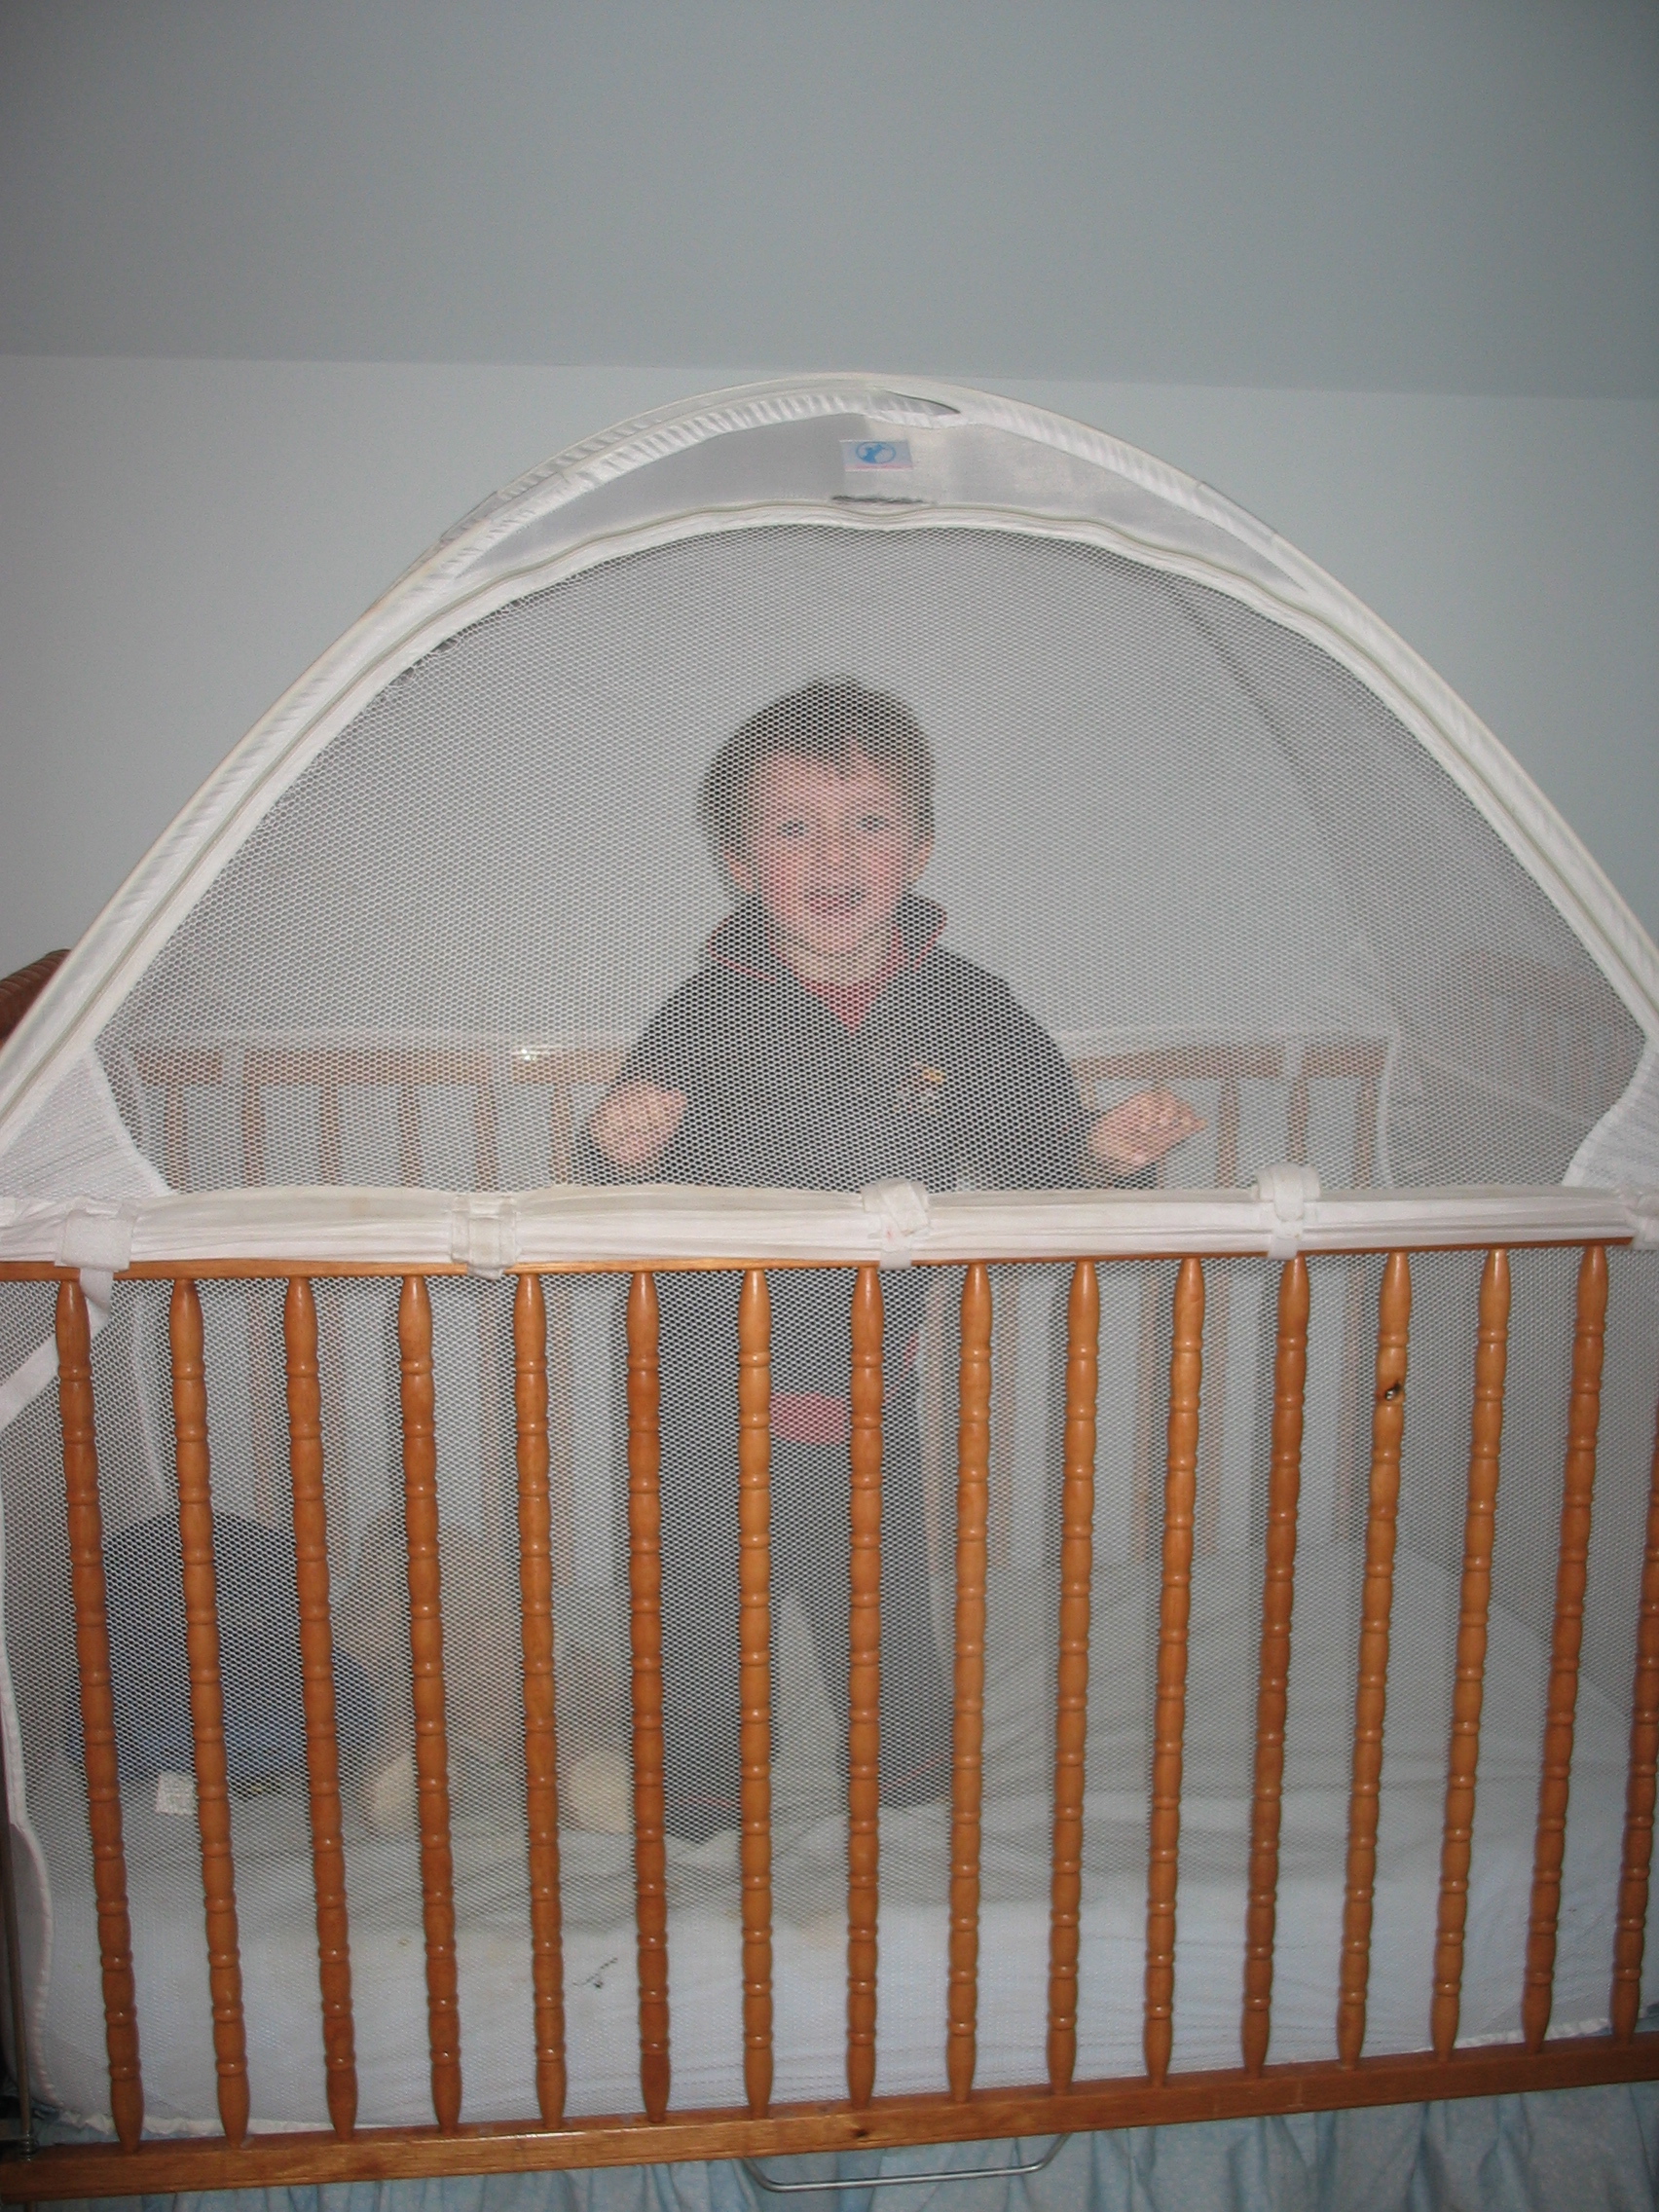 It’s a Cage, OMWord, I Just Assembled a Cage For My Child